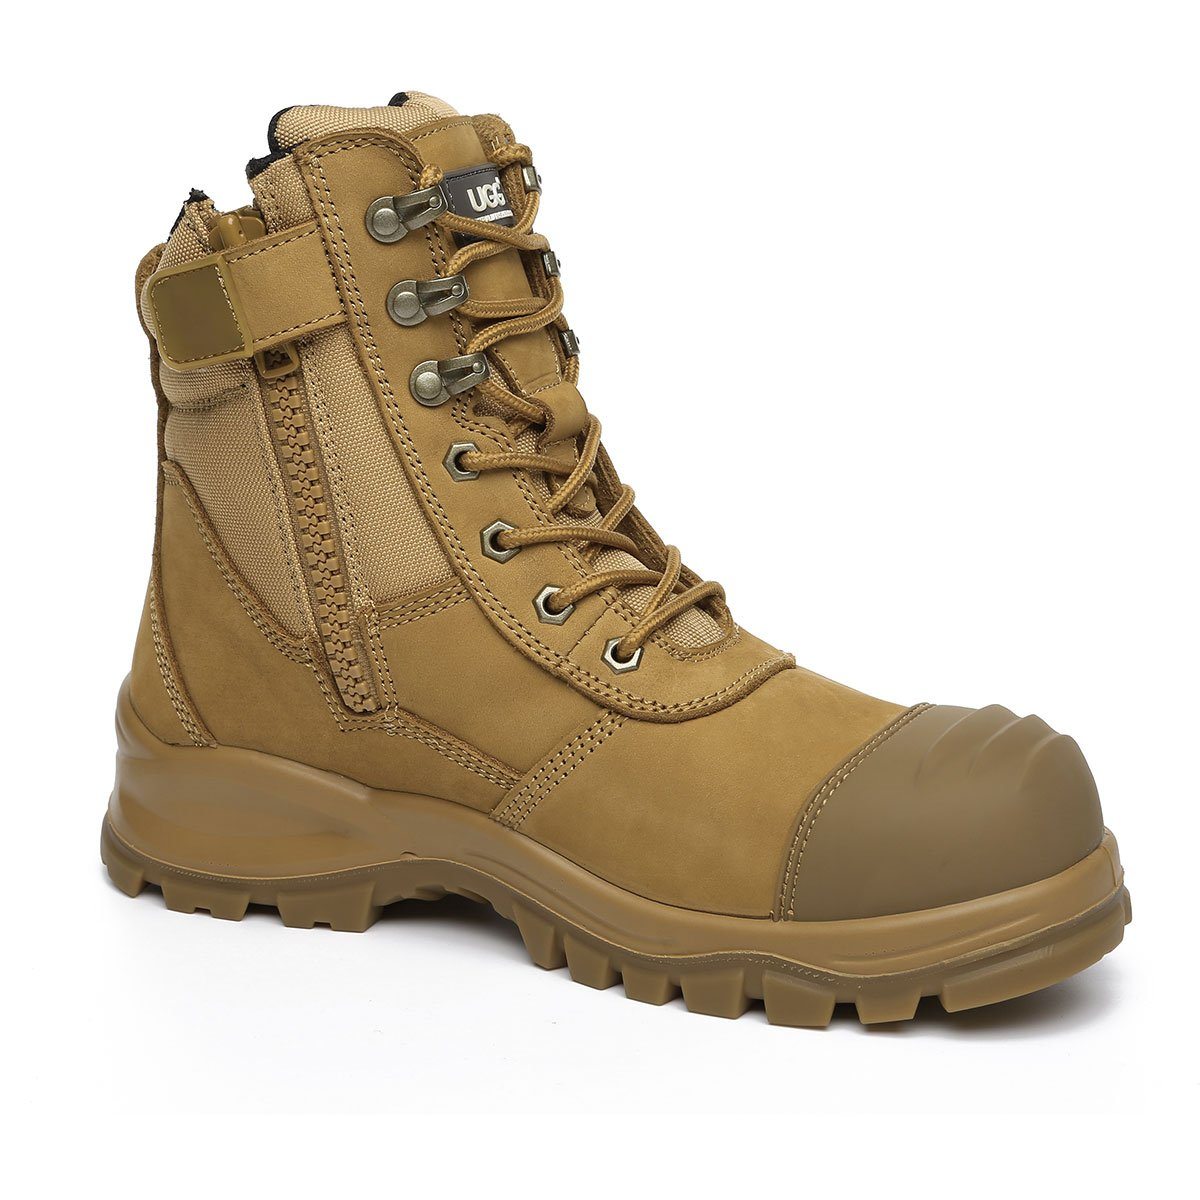 UGG Steel Toe Cap Safety Boots